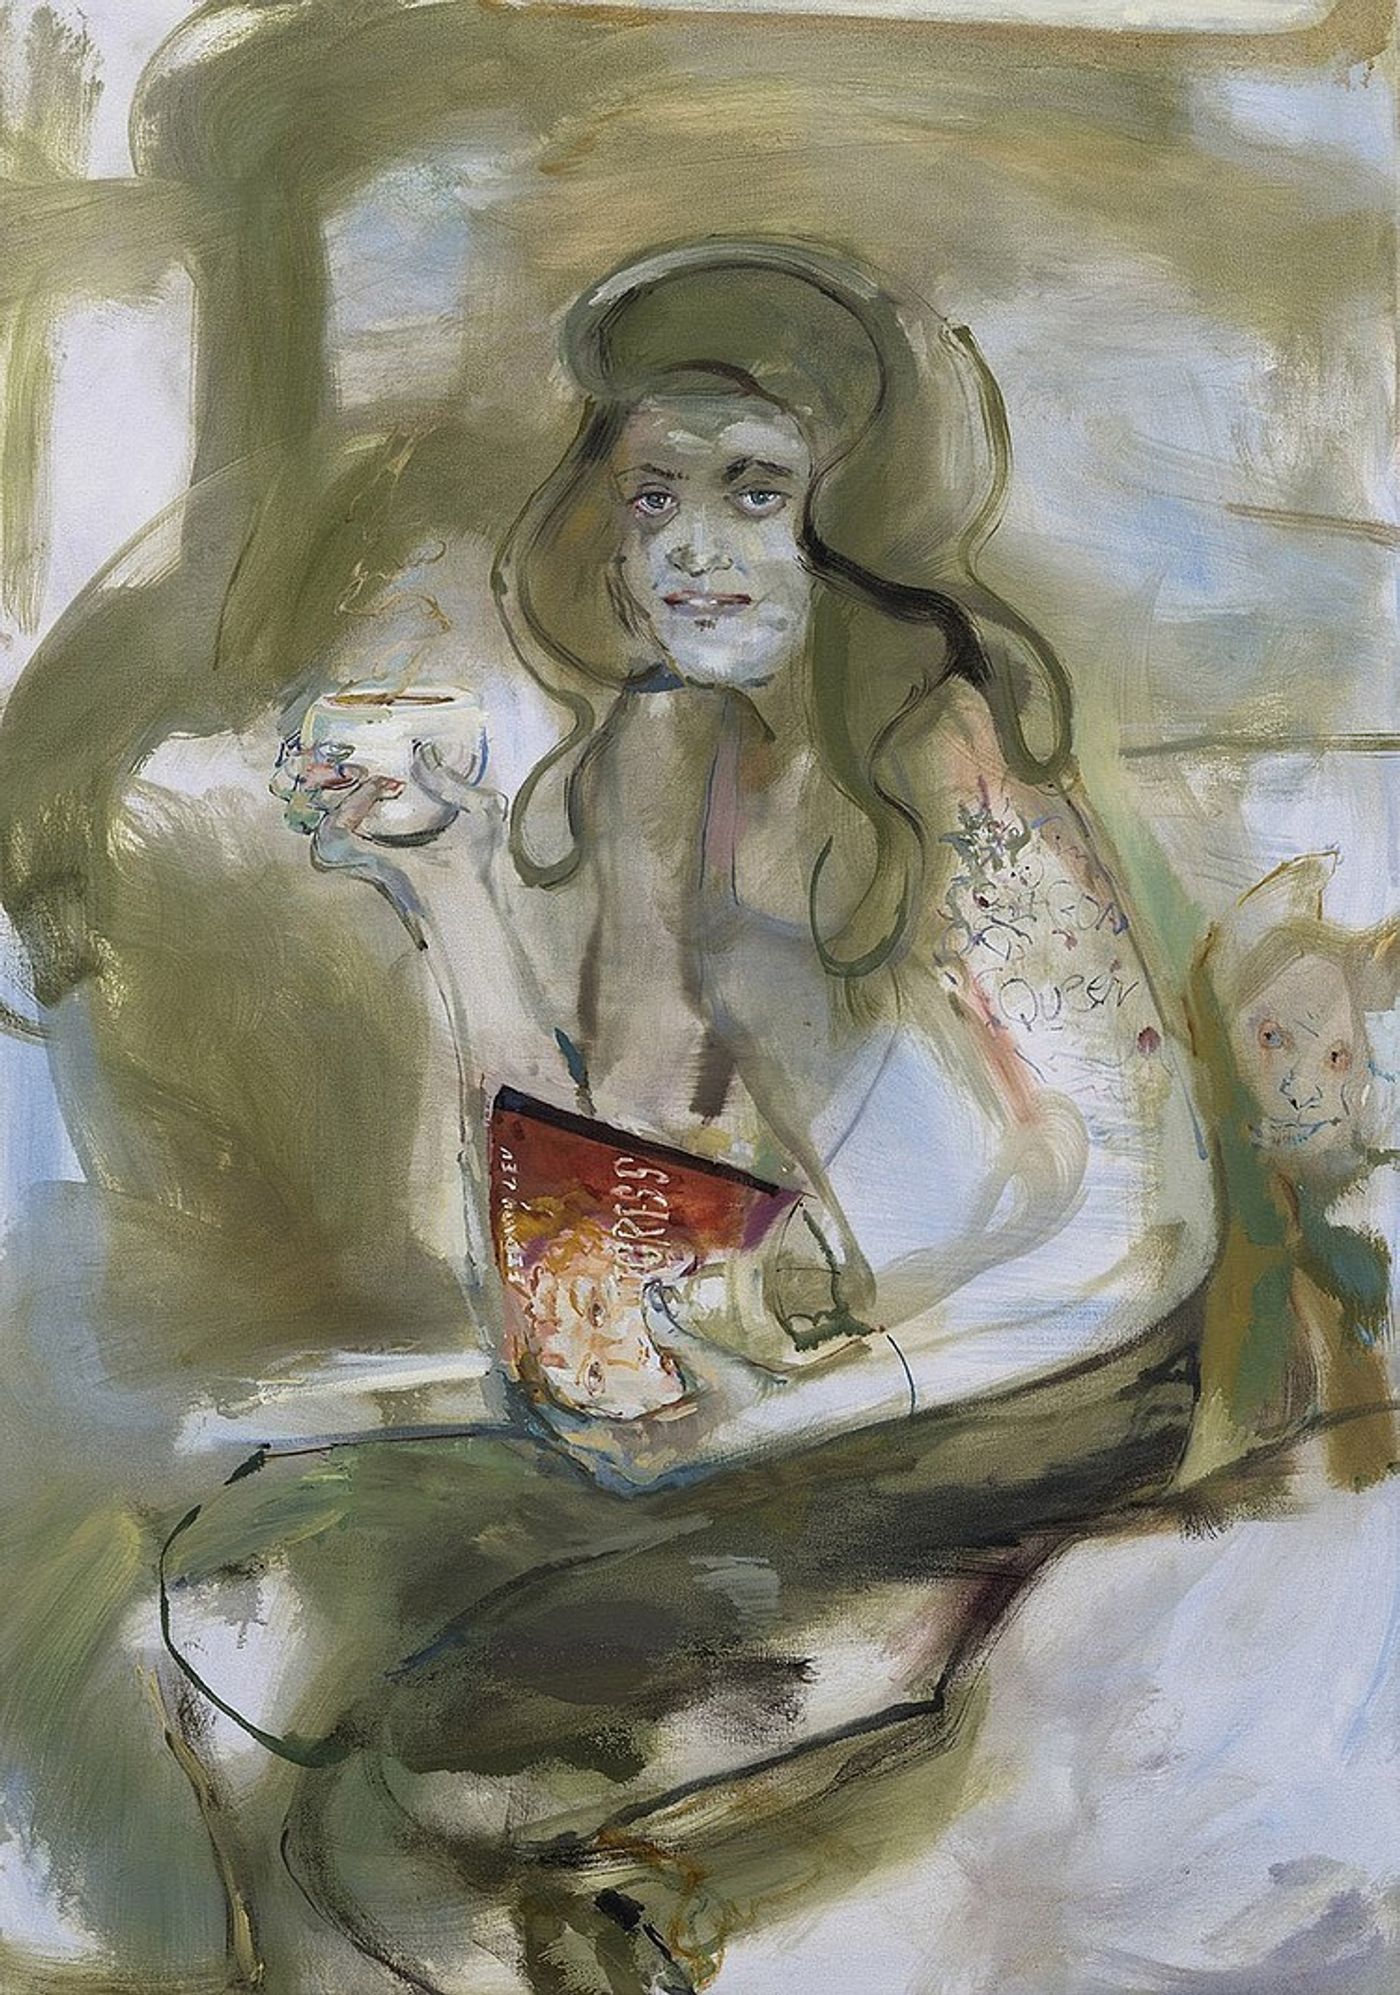 Angela Dufresne, Queen Research-Caterina Sforza and Coffee, 2018. Oil on canvas, 40 x 28 in (101.5 x 71 cm).